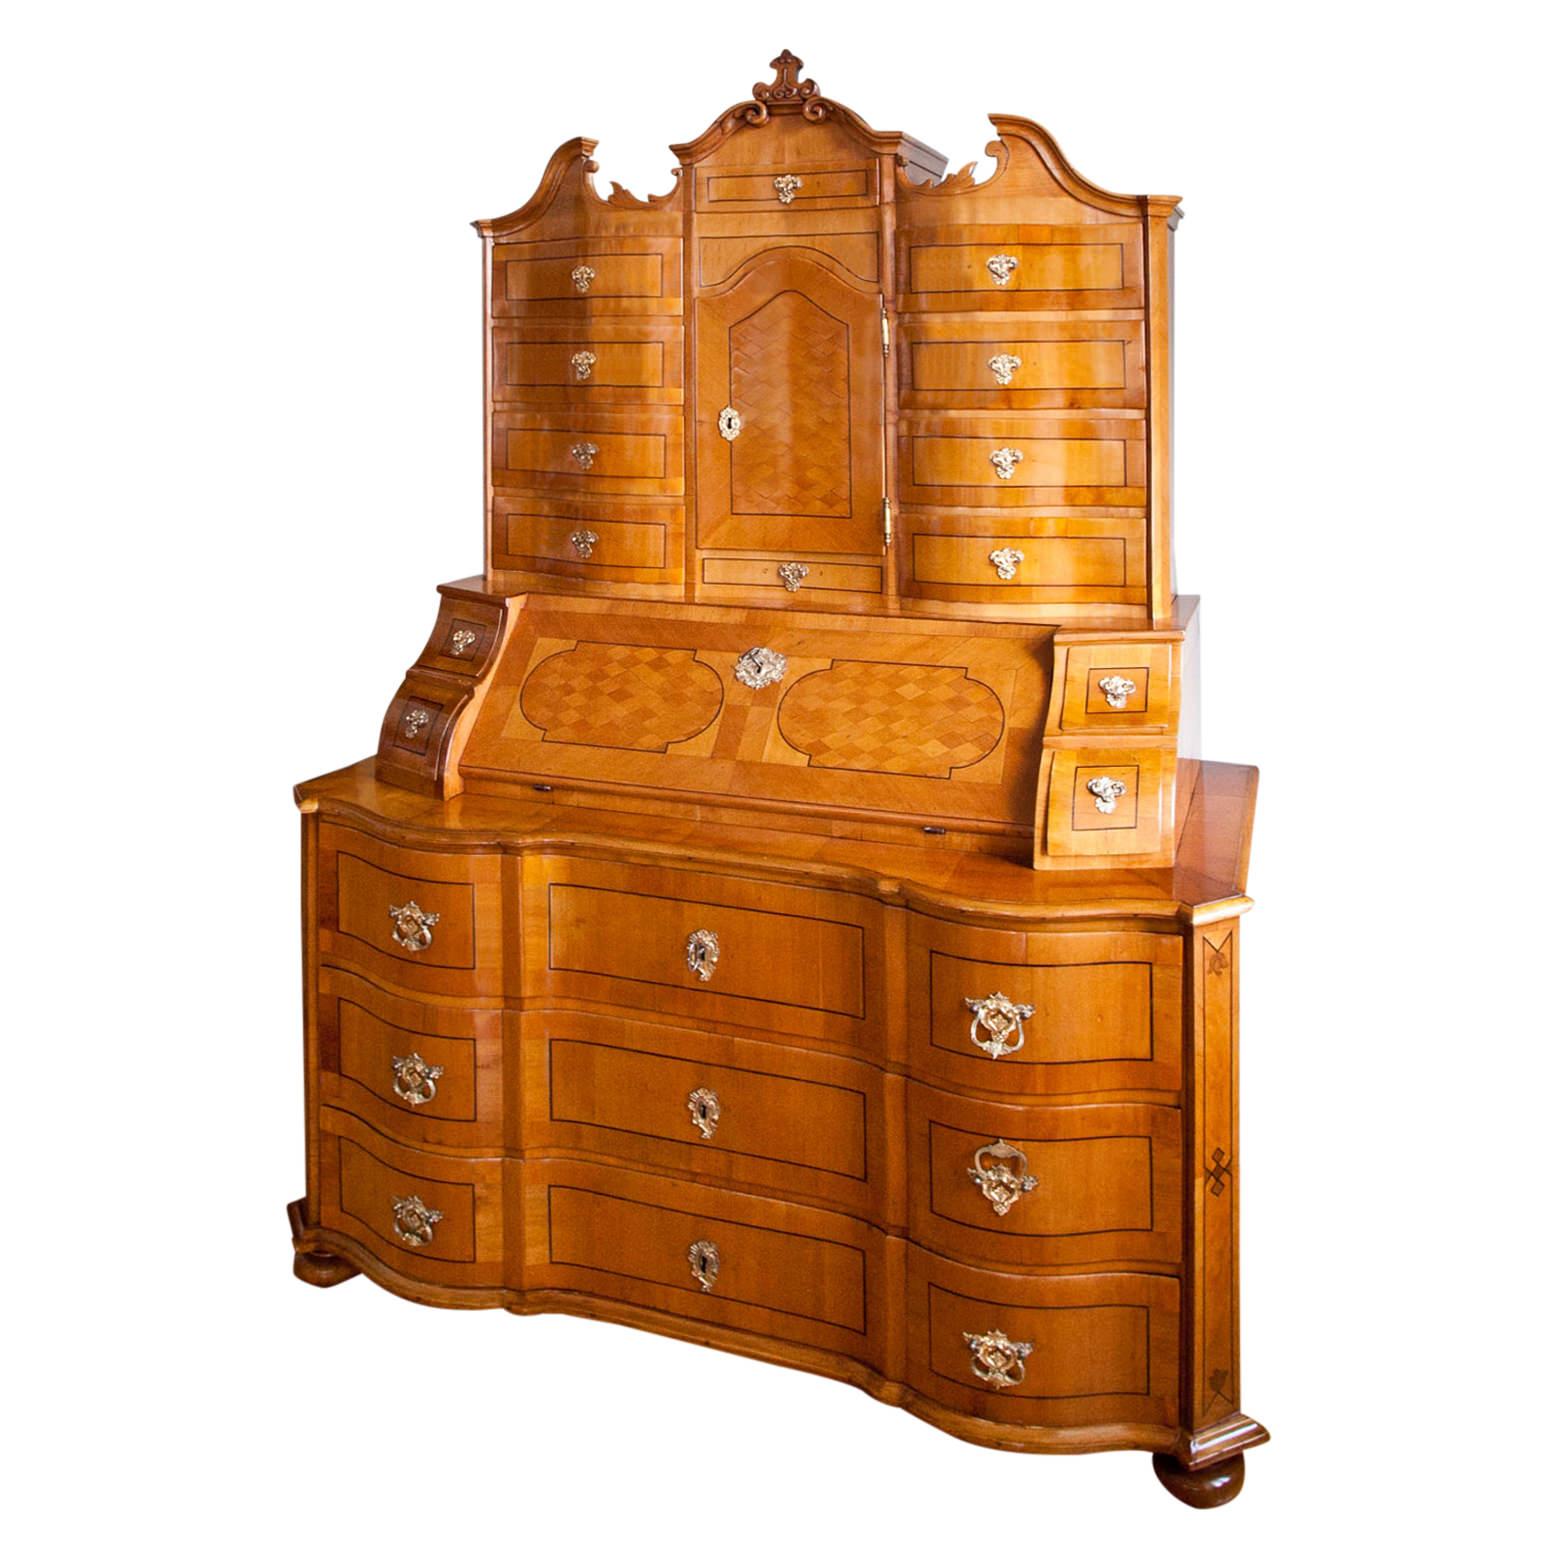 Large Baroque secretaire on bun feet with a three-drawer commode base with a serpentine front, a writing surface at a height of 80 cm and a broken pediment top part. The doors and drawers are decorated with thread inlays, the doors also with